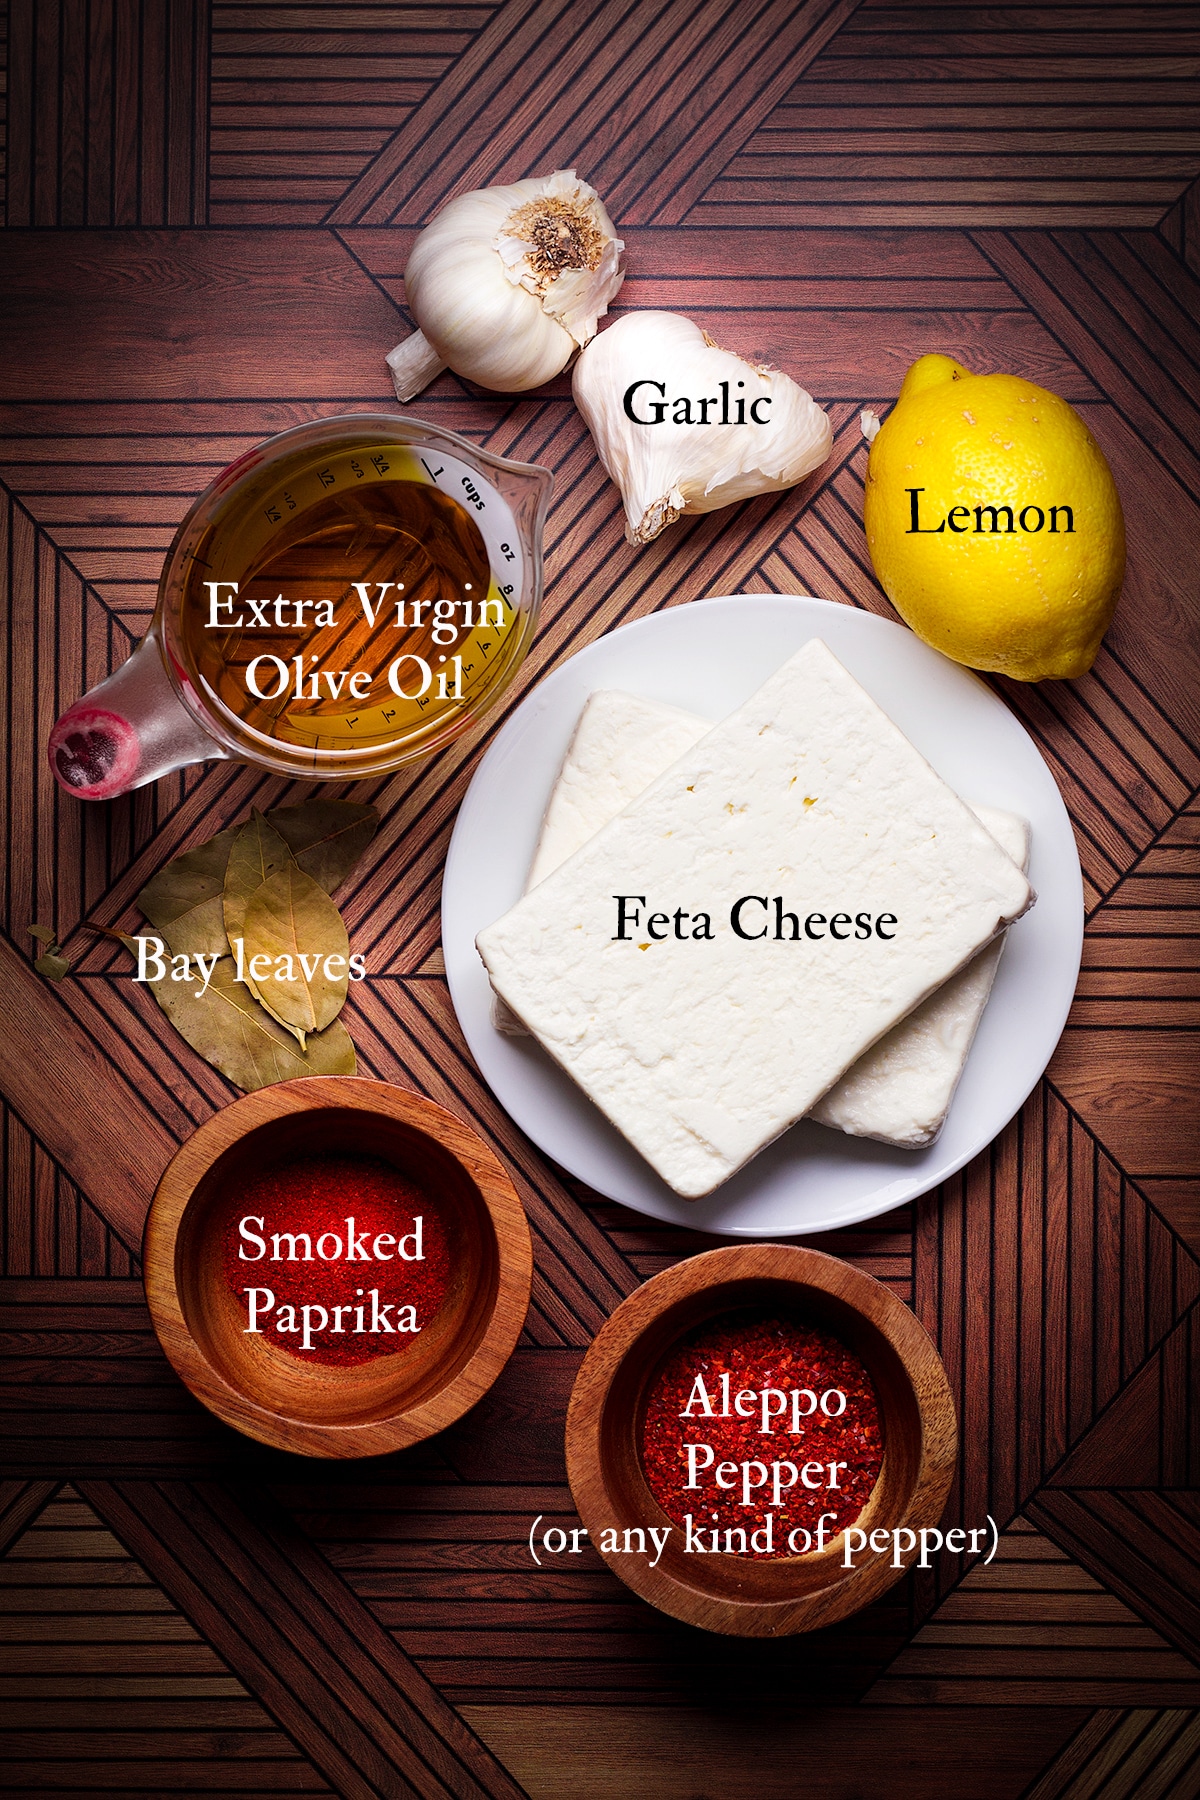 All the ingredients needed to prepare this recipe for marinated feta.